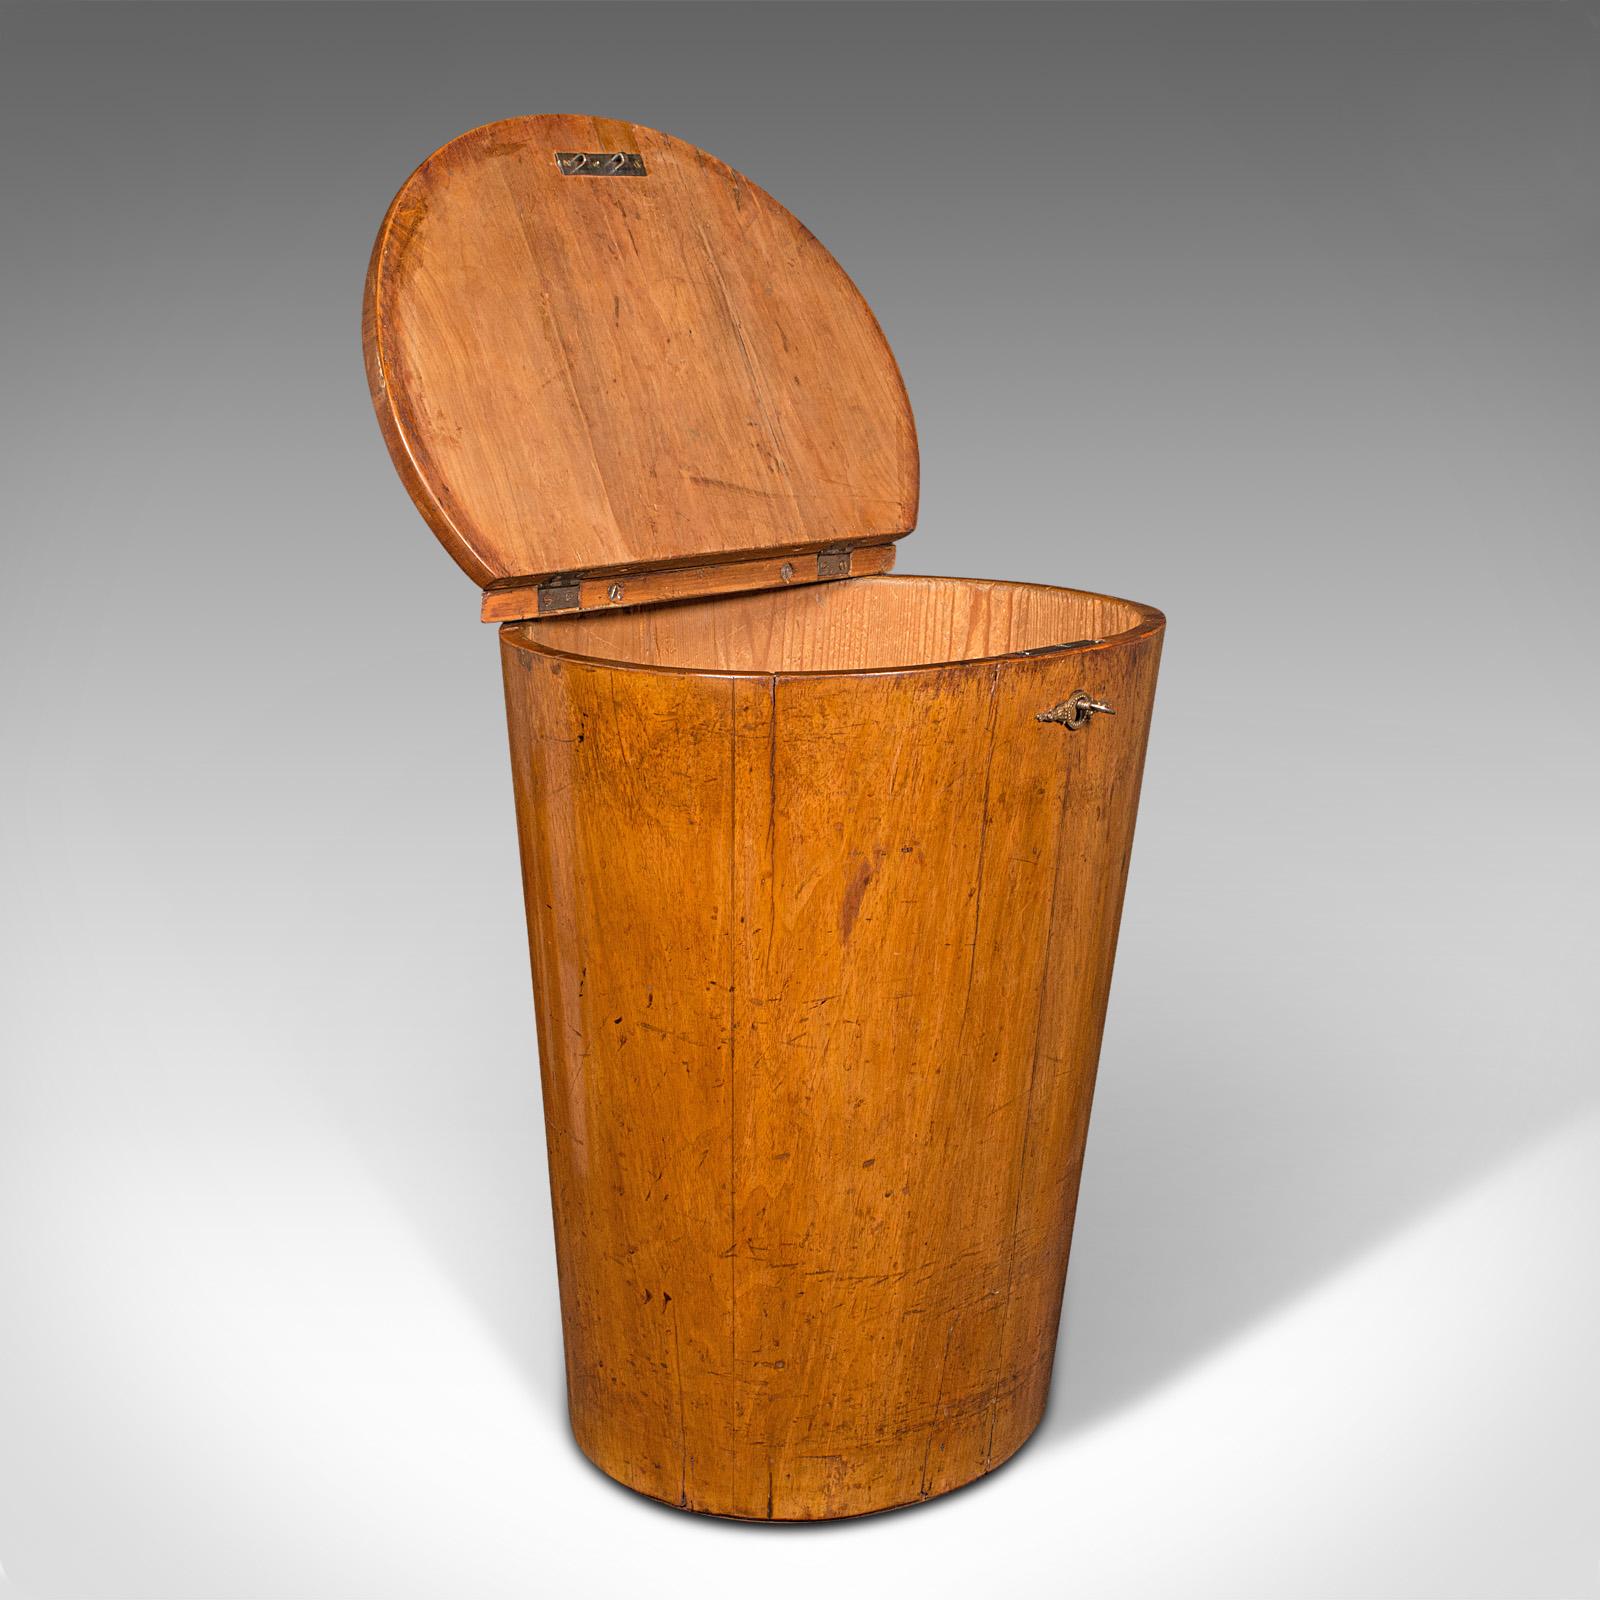 This is an antique Provençal grain hopper. A French, fruitwood country house storage bin, linen basket or occasional chair, dating to the early Victorian period, circa 1850.

Distinctive tapering oval form with delightful craftsmanship
Displays a